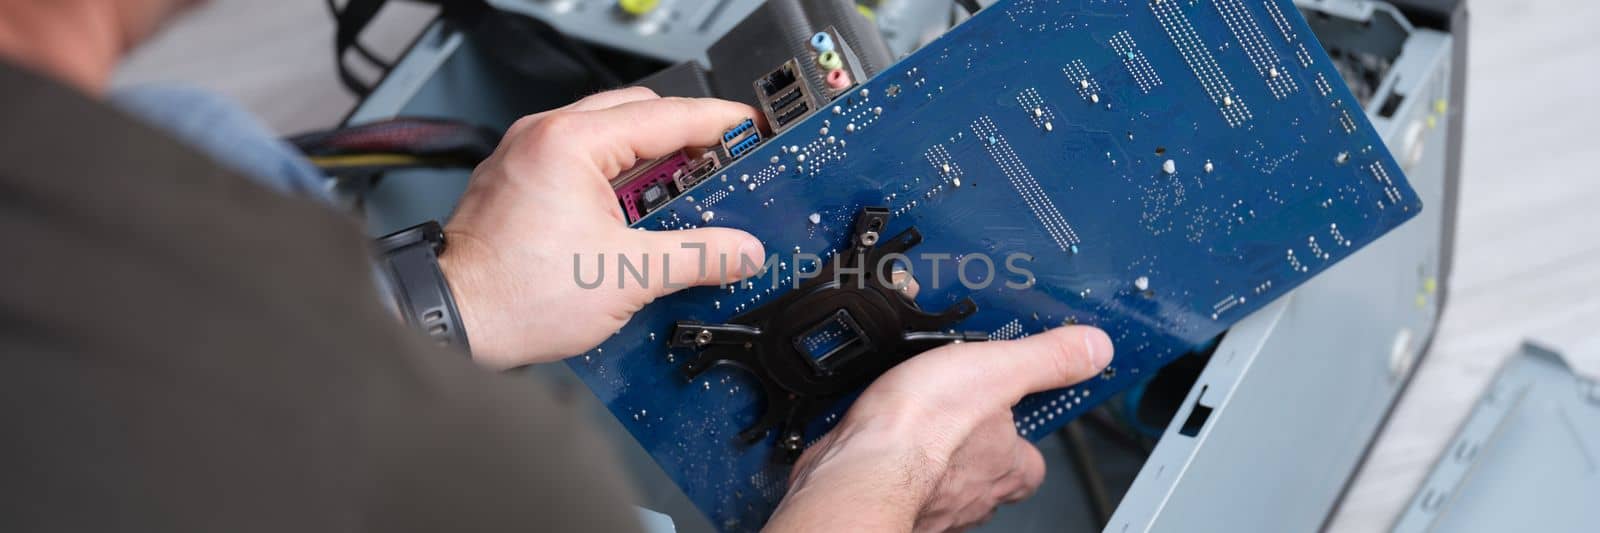 Computer repair, personal computer assembly and PC assembly. Open system unit prepared for repair concept